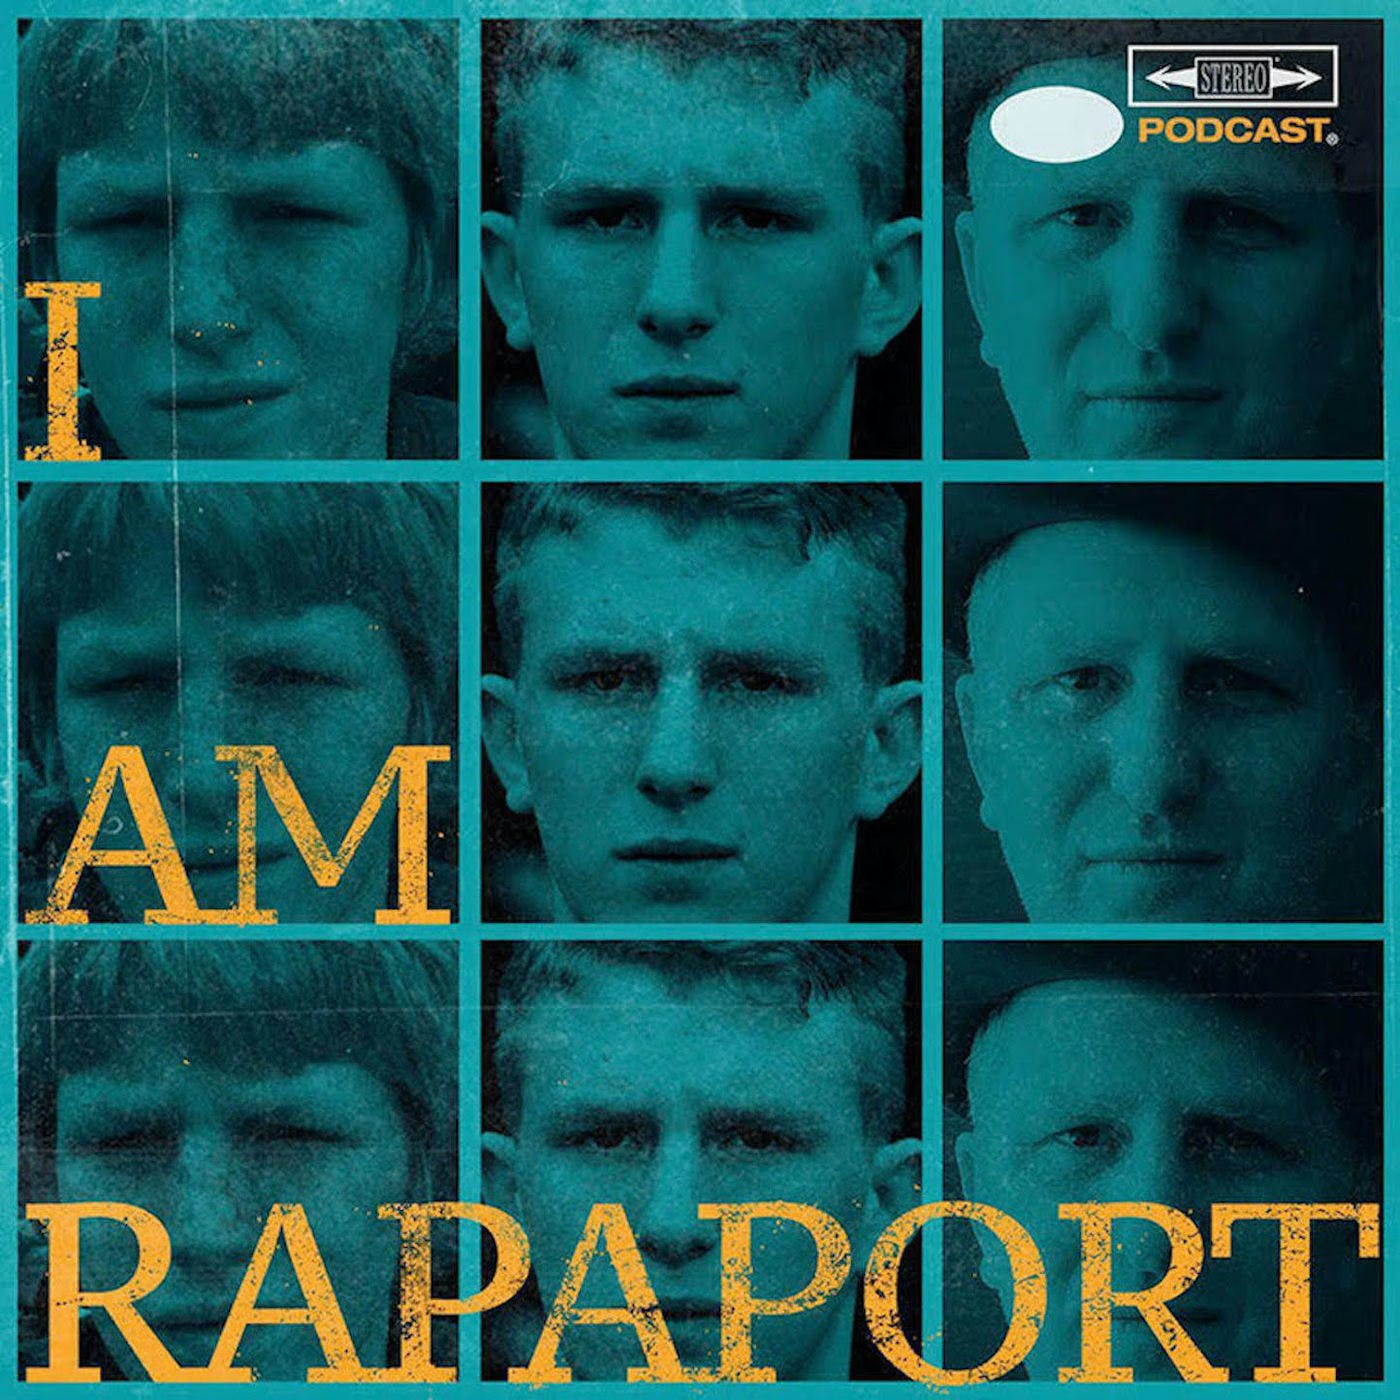 EP 196 - FANTASY FOOTBALL FOLLIES 1 - PRESENTED BY DRAFTKINGS (PROMO CODE: RAPAPORT)